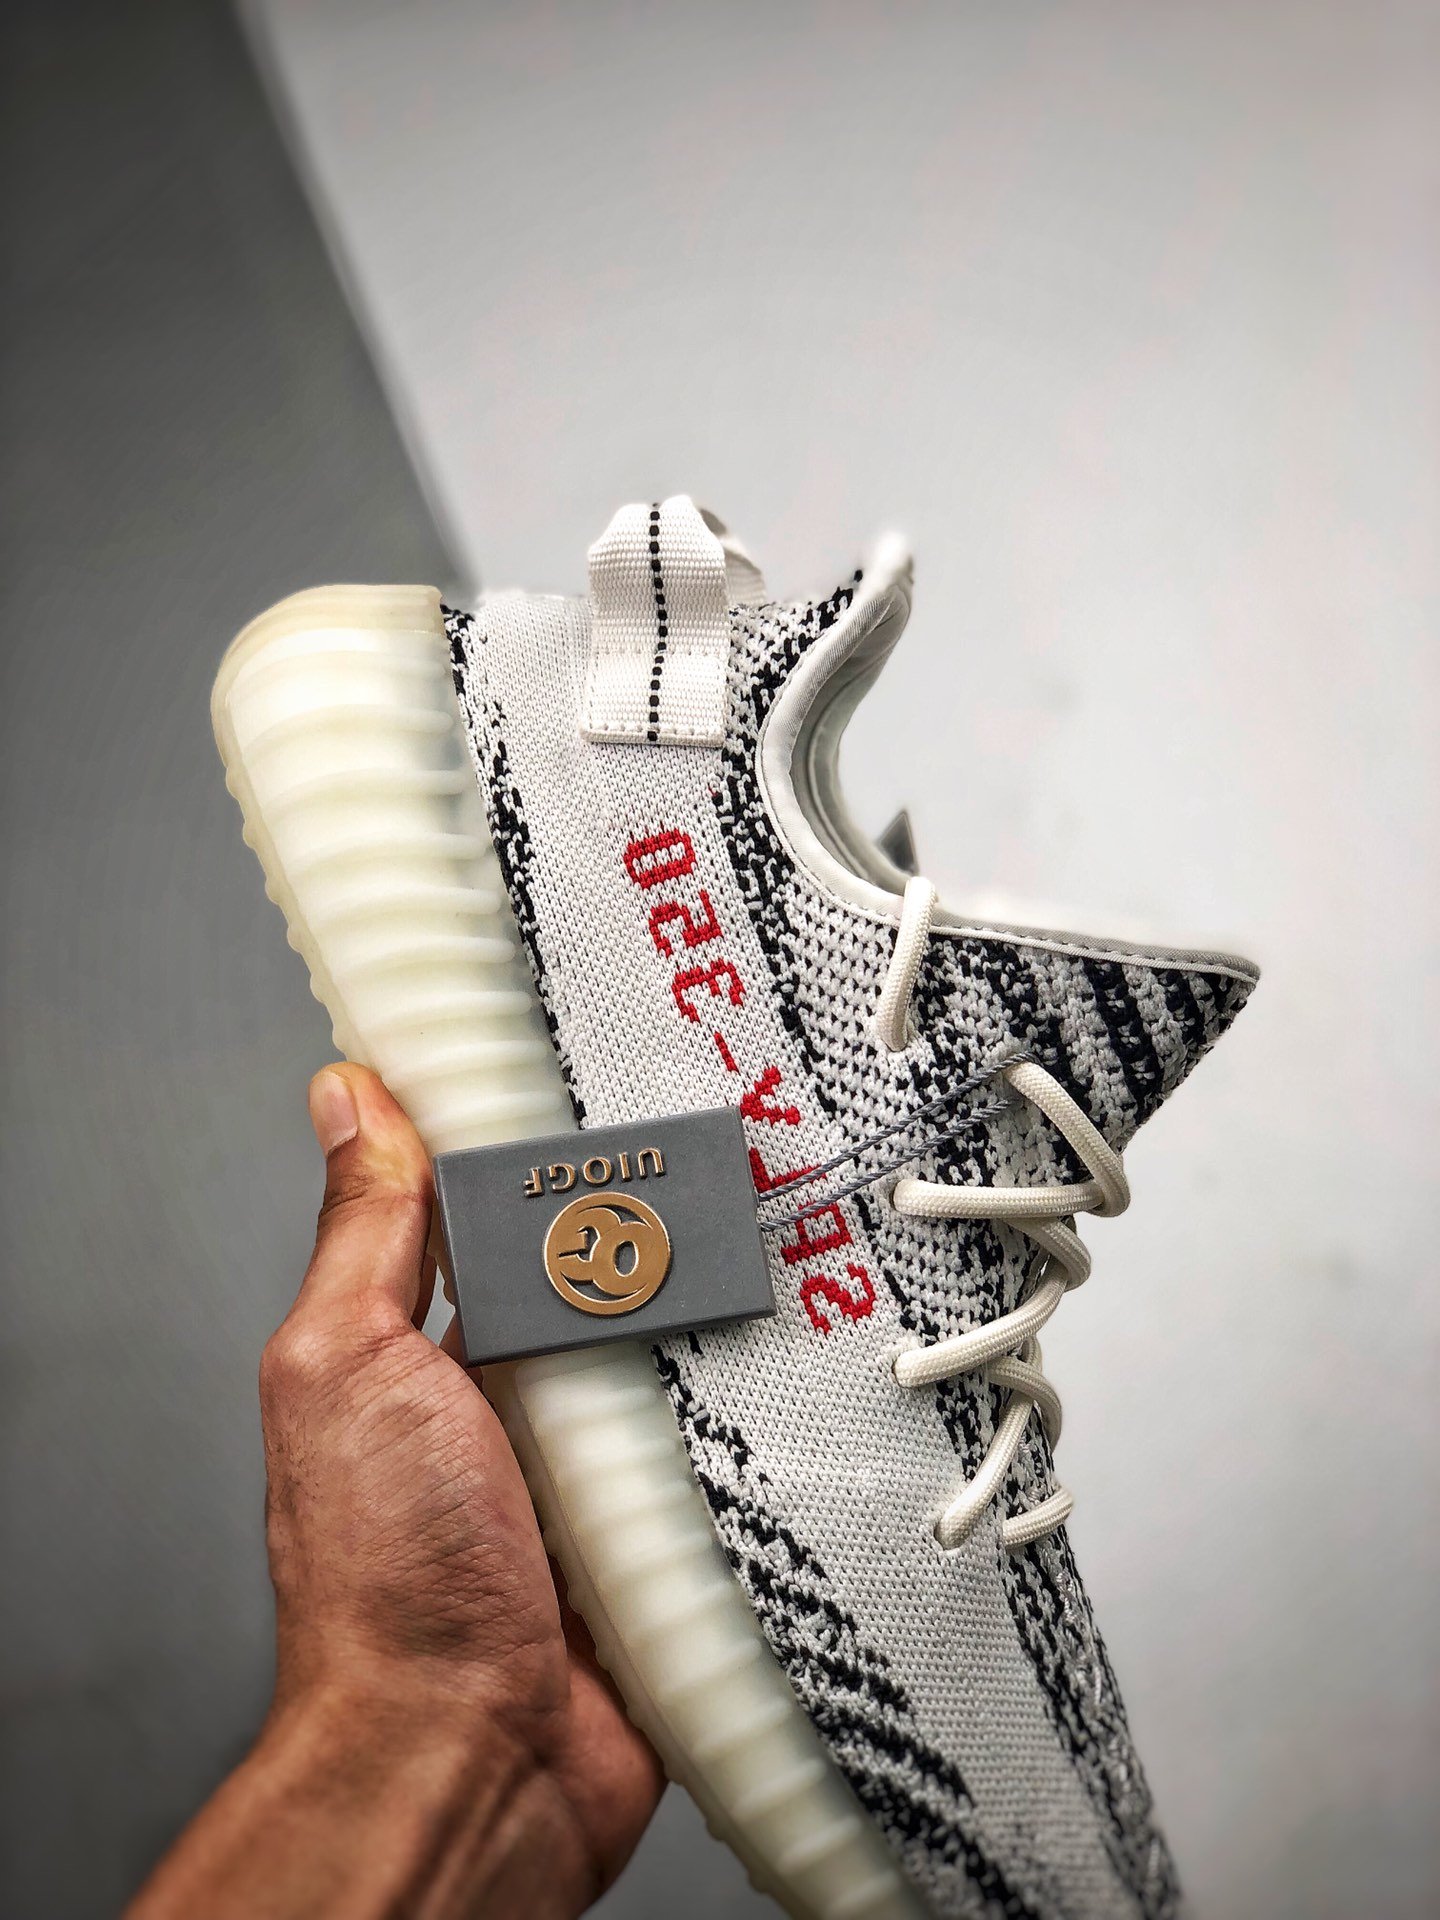 adidas Yeezy Boost 350 V2 “Zebra” CP9654 For Sale – Sneaker Hello